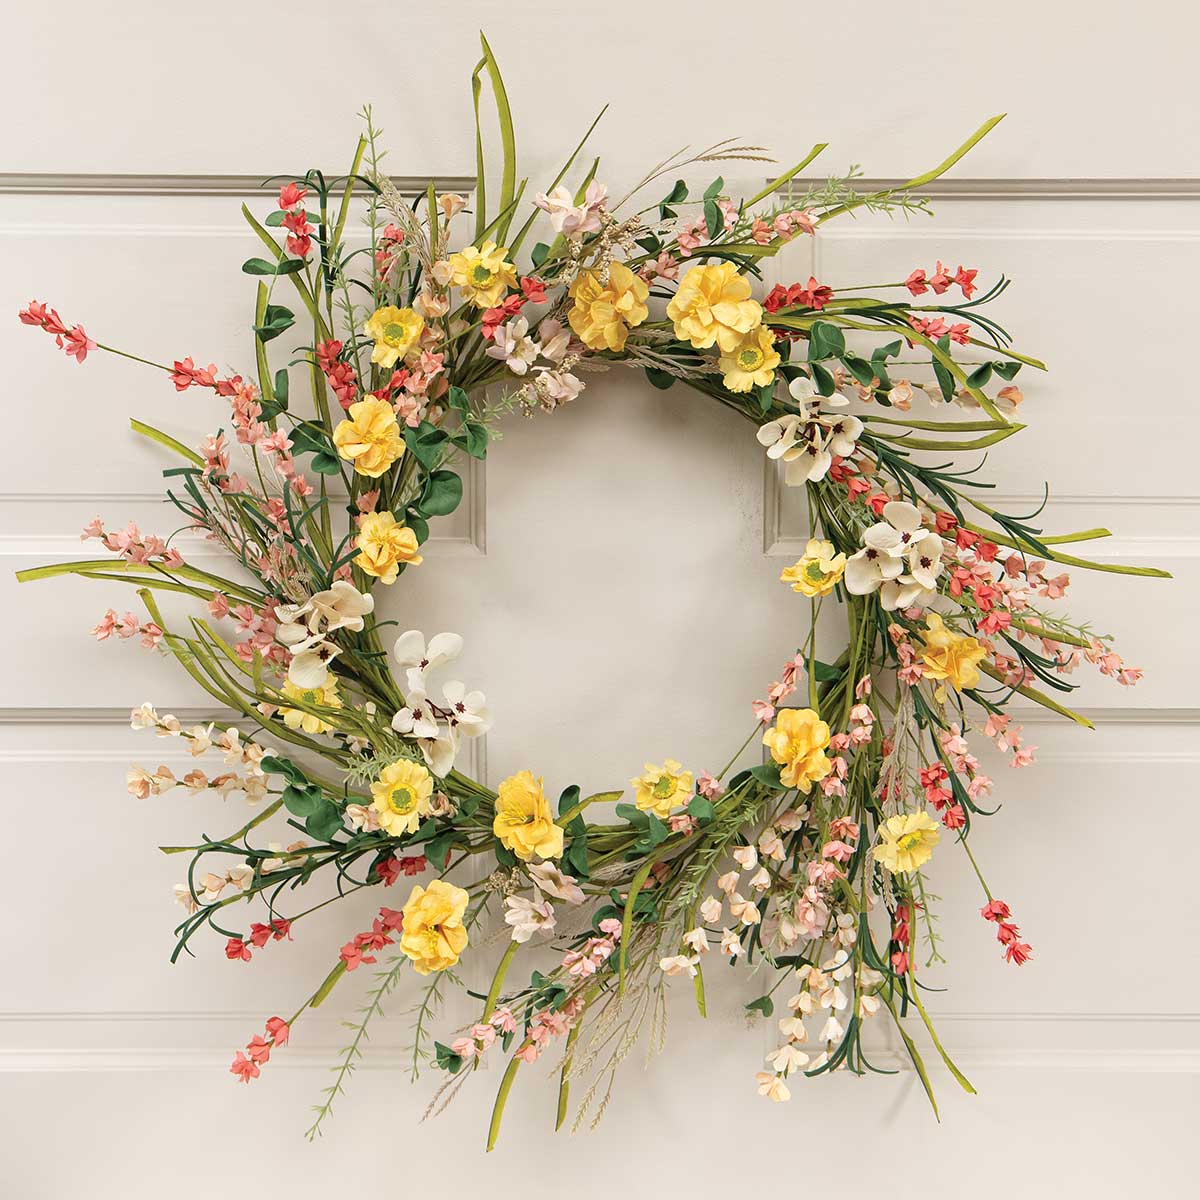 !Whimsey Floral Wreath 24"(INNER RING 11") Zinnia/Mini